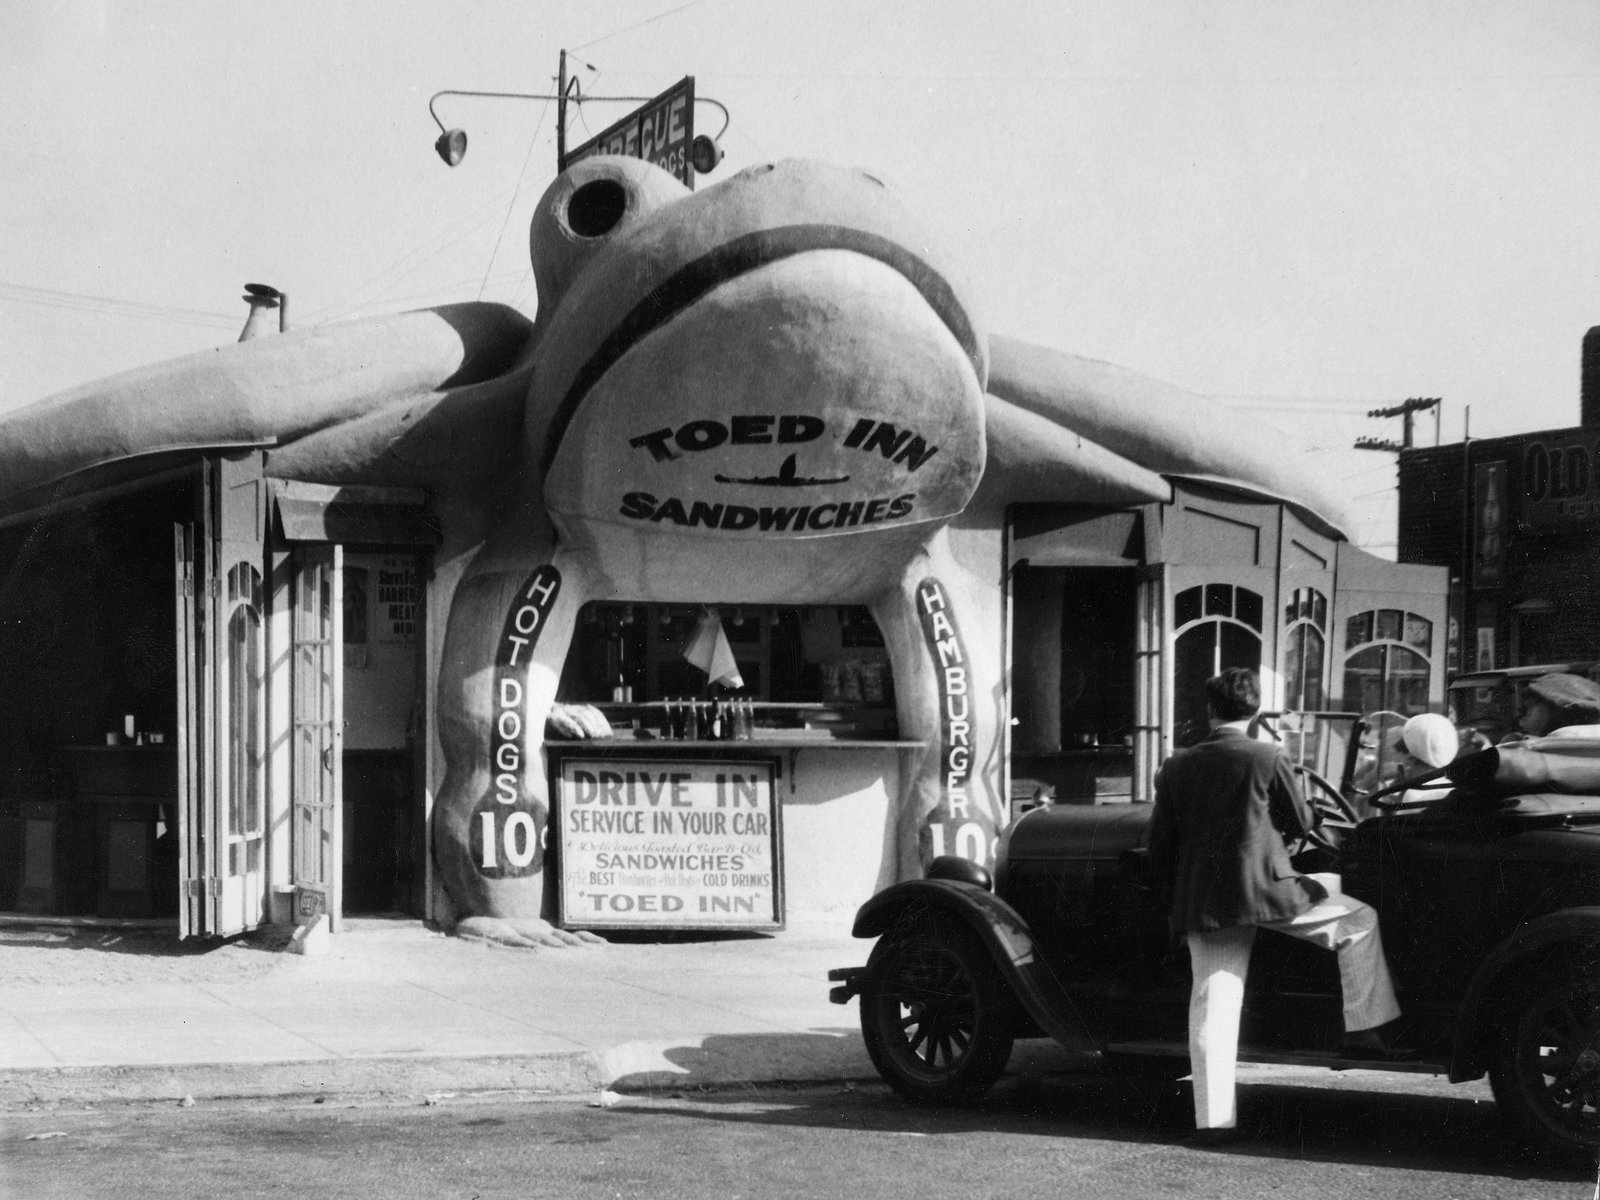 Black and white drive-in shaped like a toad